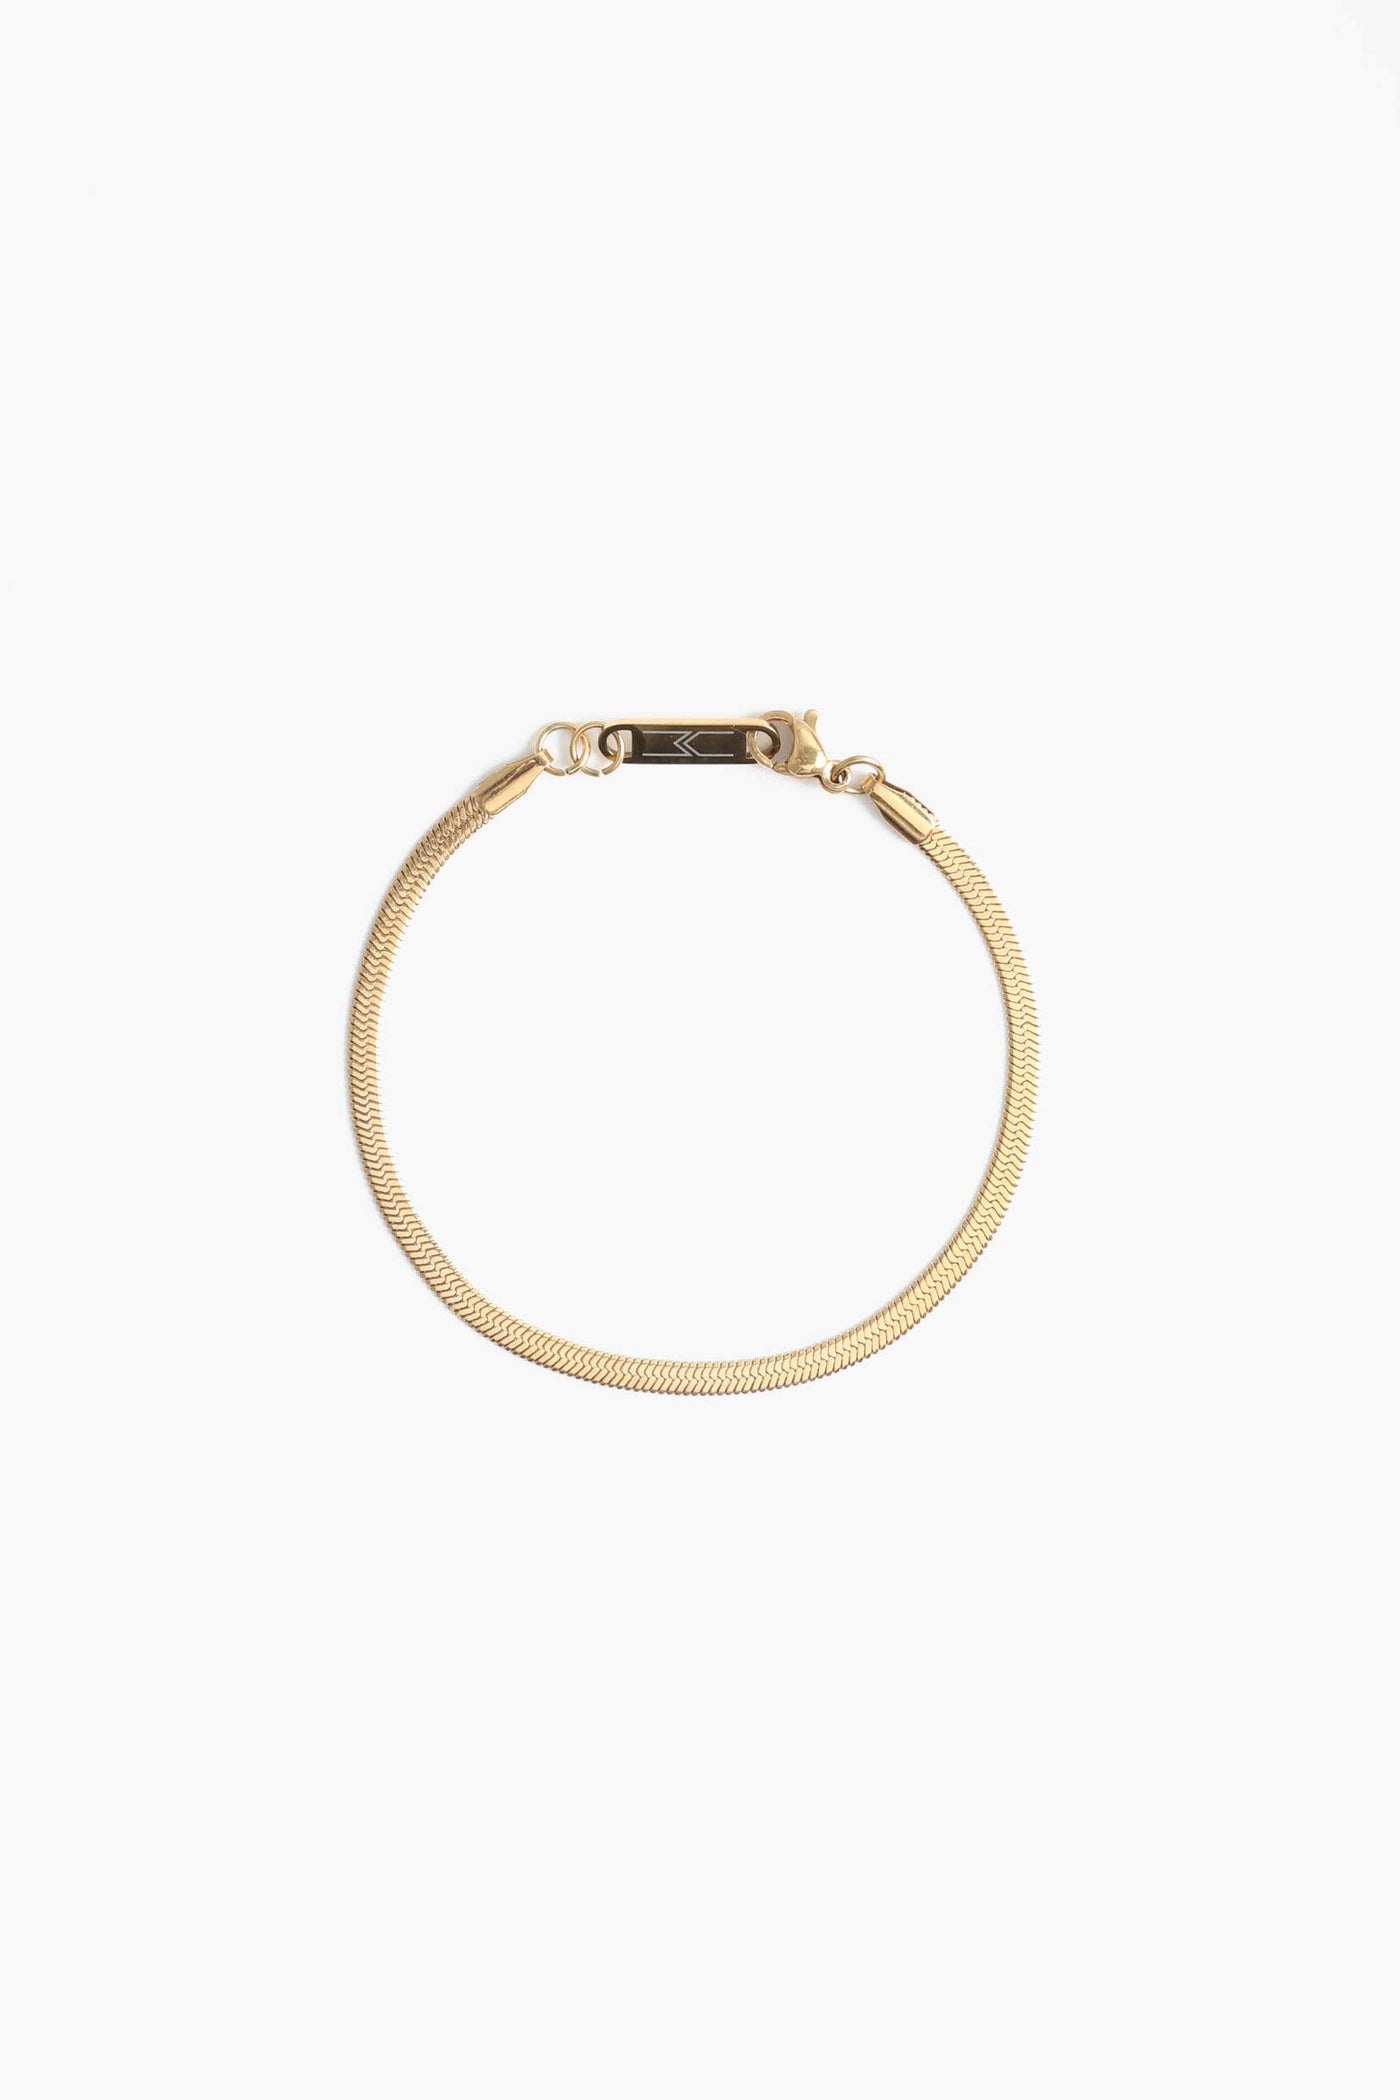 Marrin Costello Jewelry 3mm thick herringbone snake chain bracelet with lobster clasp closure. Waterproof, sustainable, hypoallergenic. 14k gold plated stainless steel.